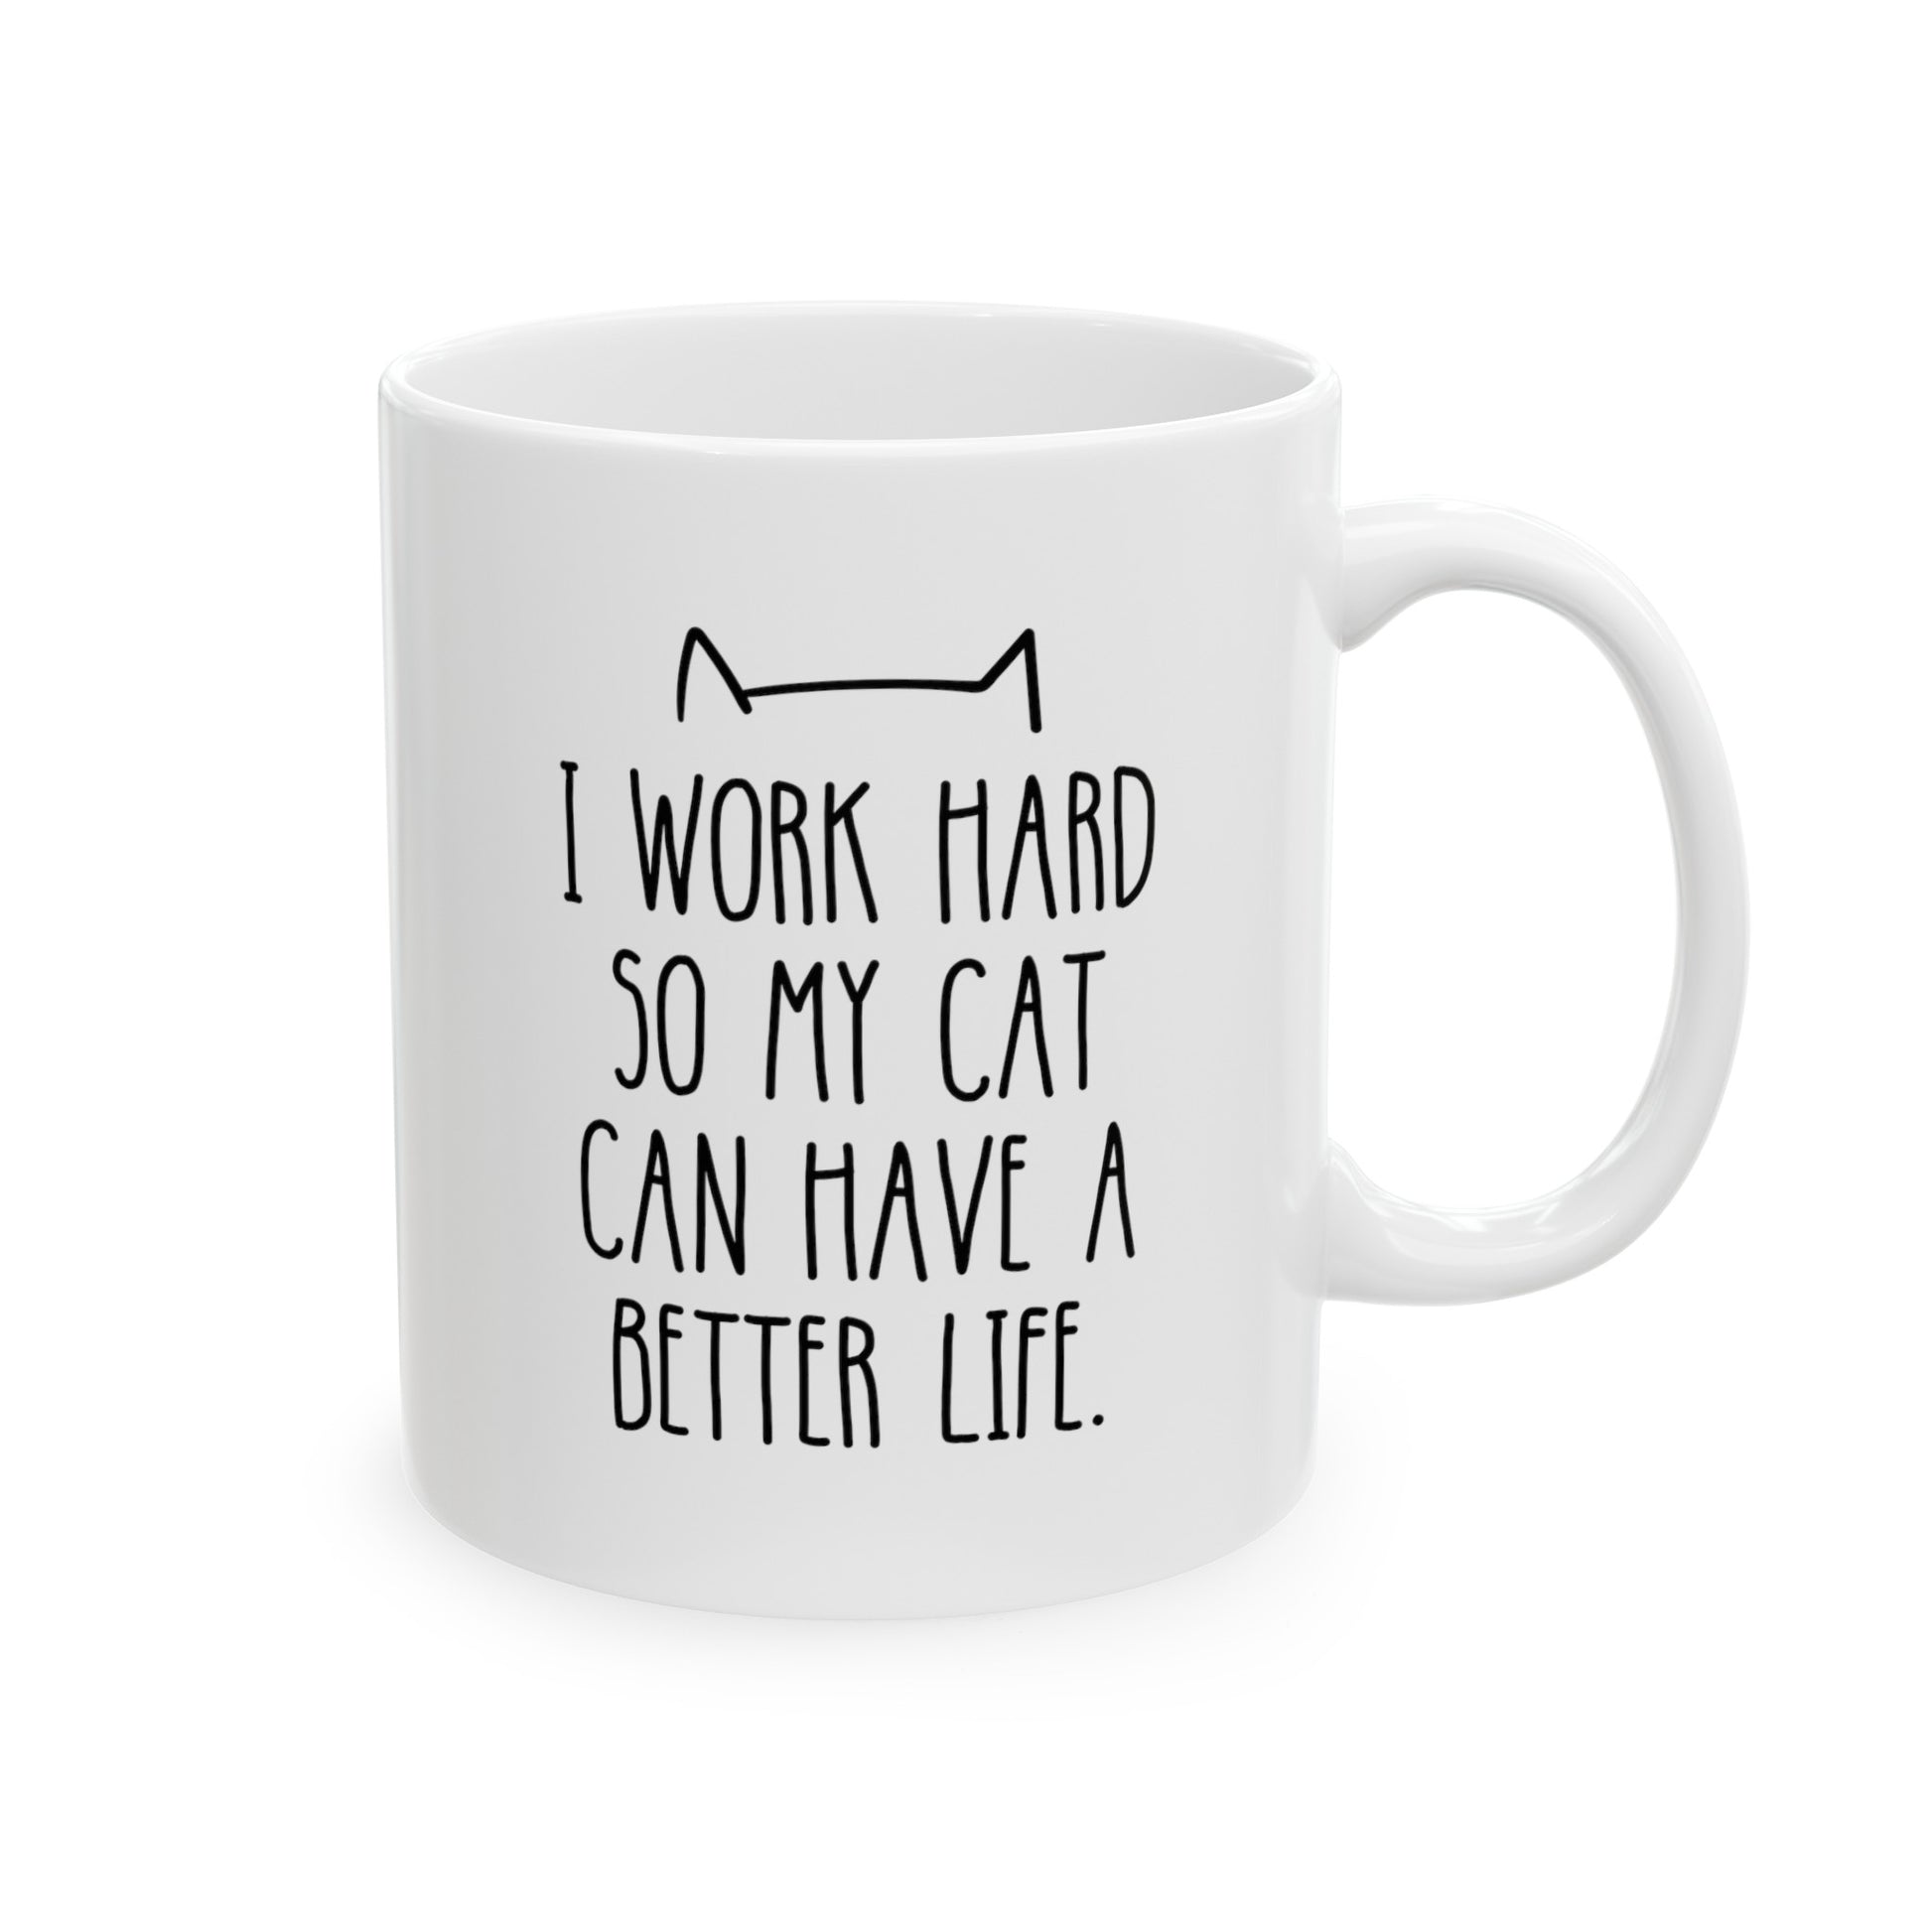 I Work Hard So My Cat Can Have A Better Life 11oz white funny large coffee mug gift for mom pet owner lover waveywares wavey wares wavywares wavy wares